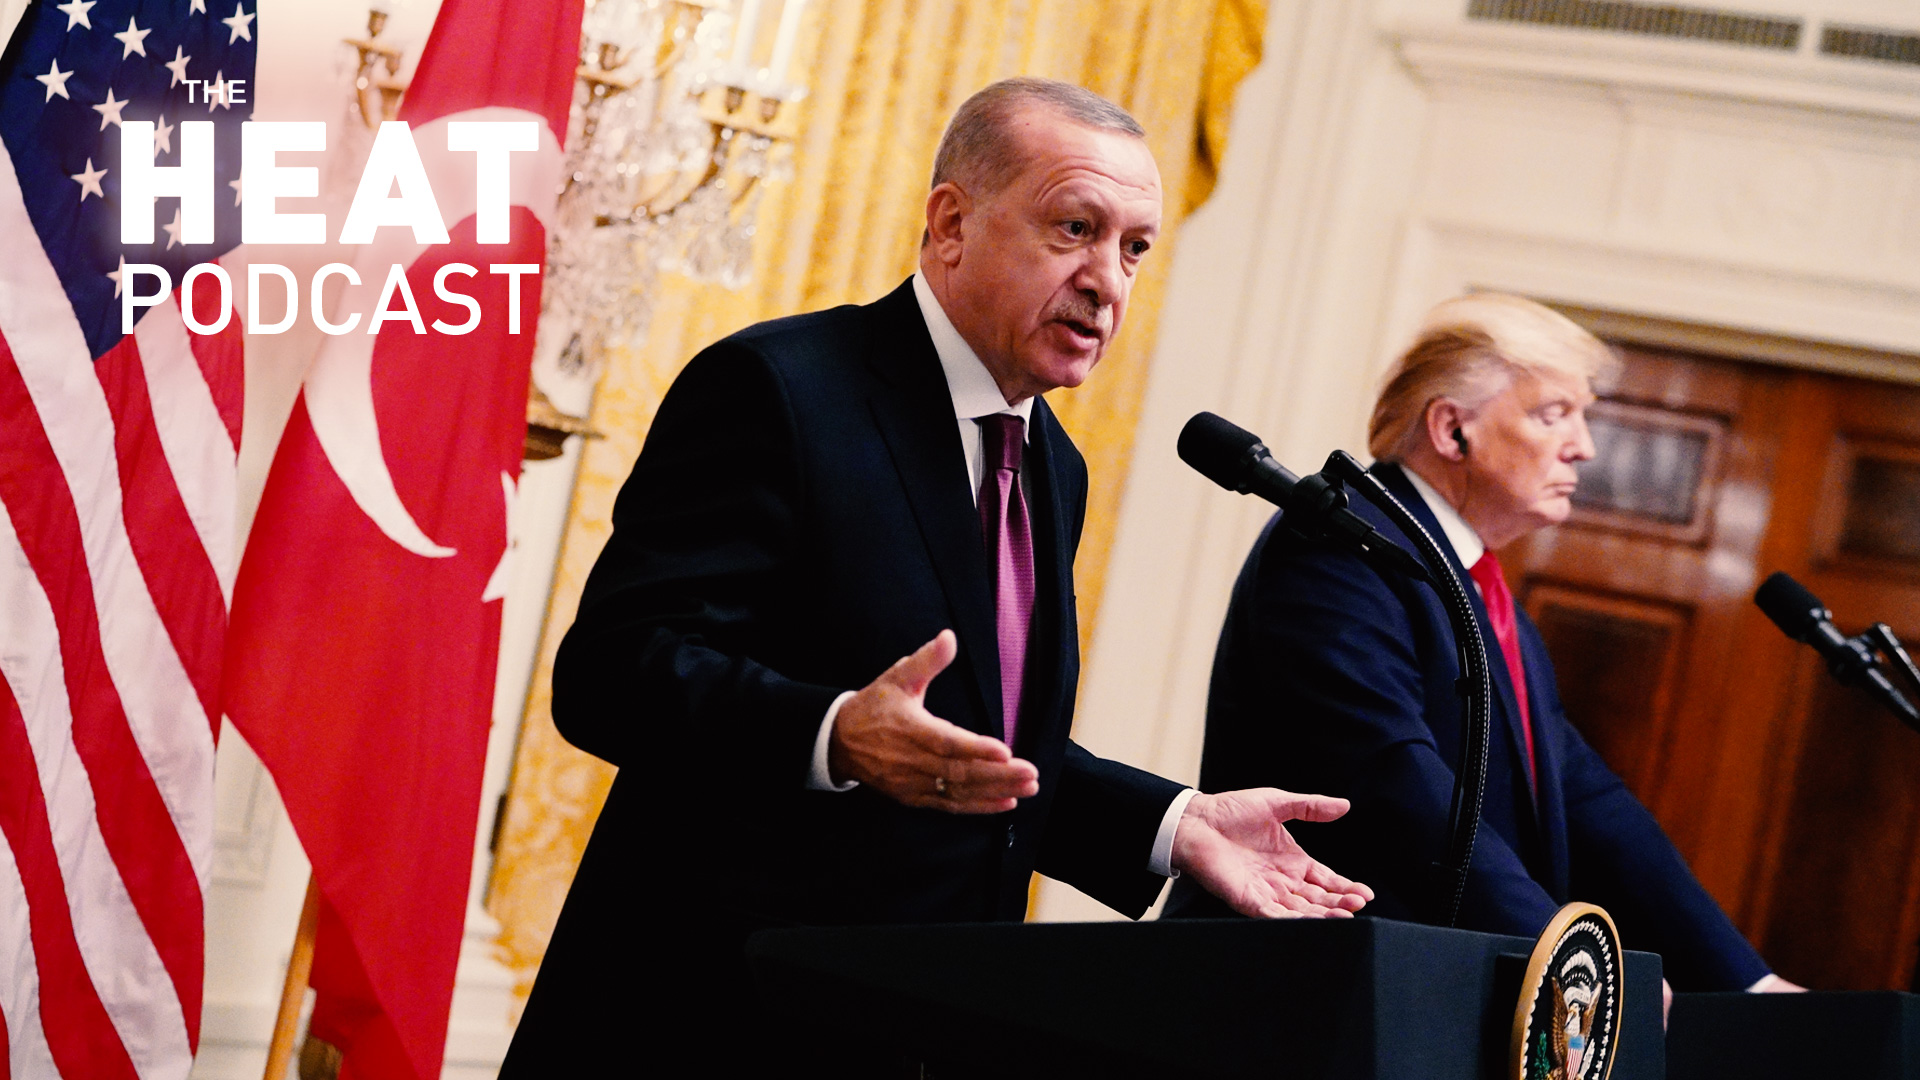 What do Trump and Erdogan want out of the US-Turkey relationship?